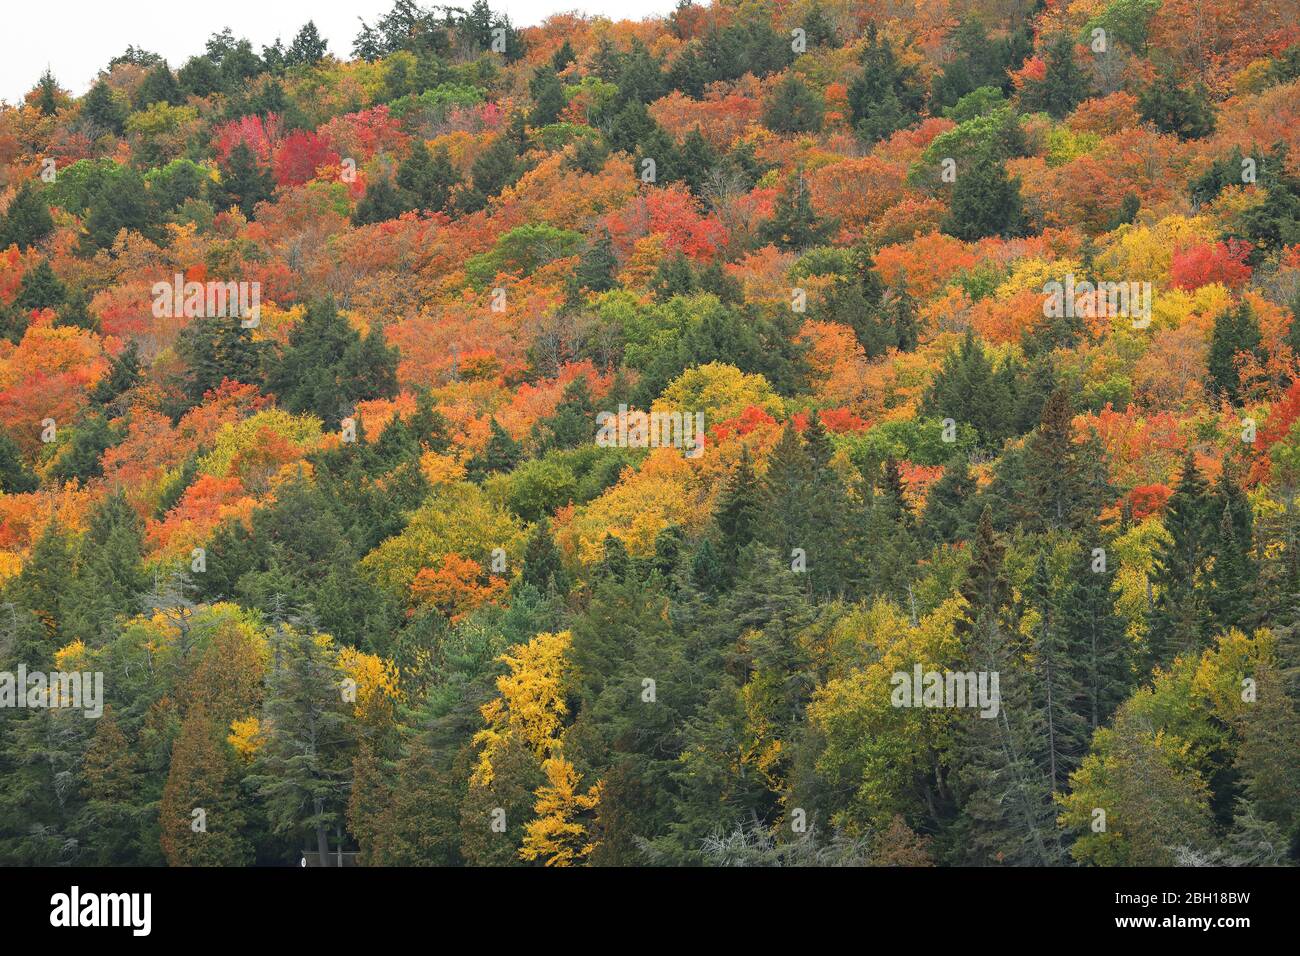 colouring of the leaves in autumn at Rock Lake, Canada, Ontario, Algonquin Provincial Park Stock Photo